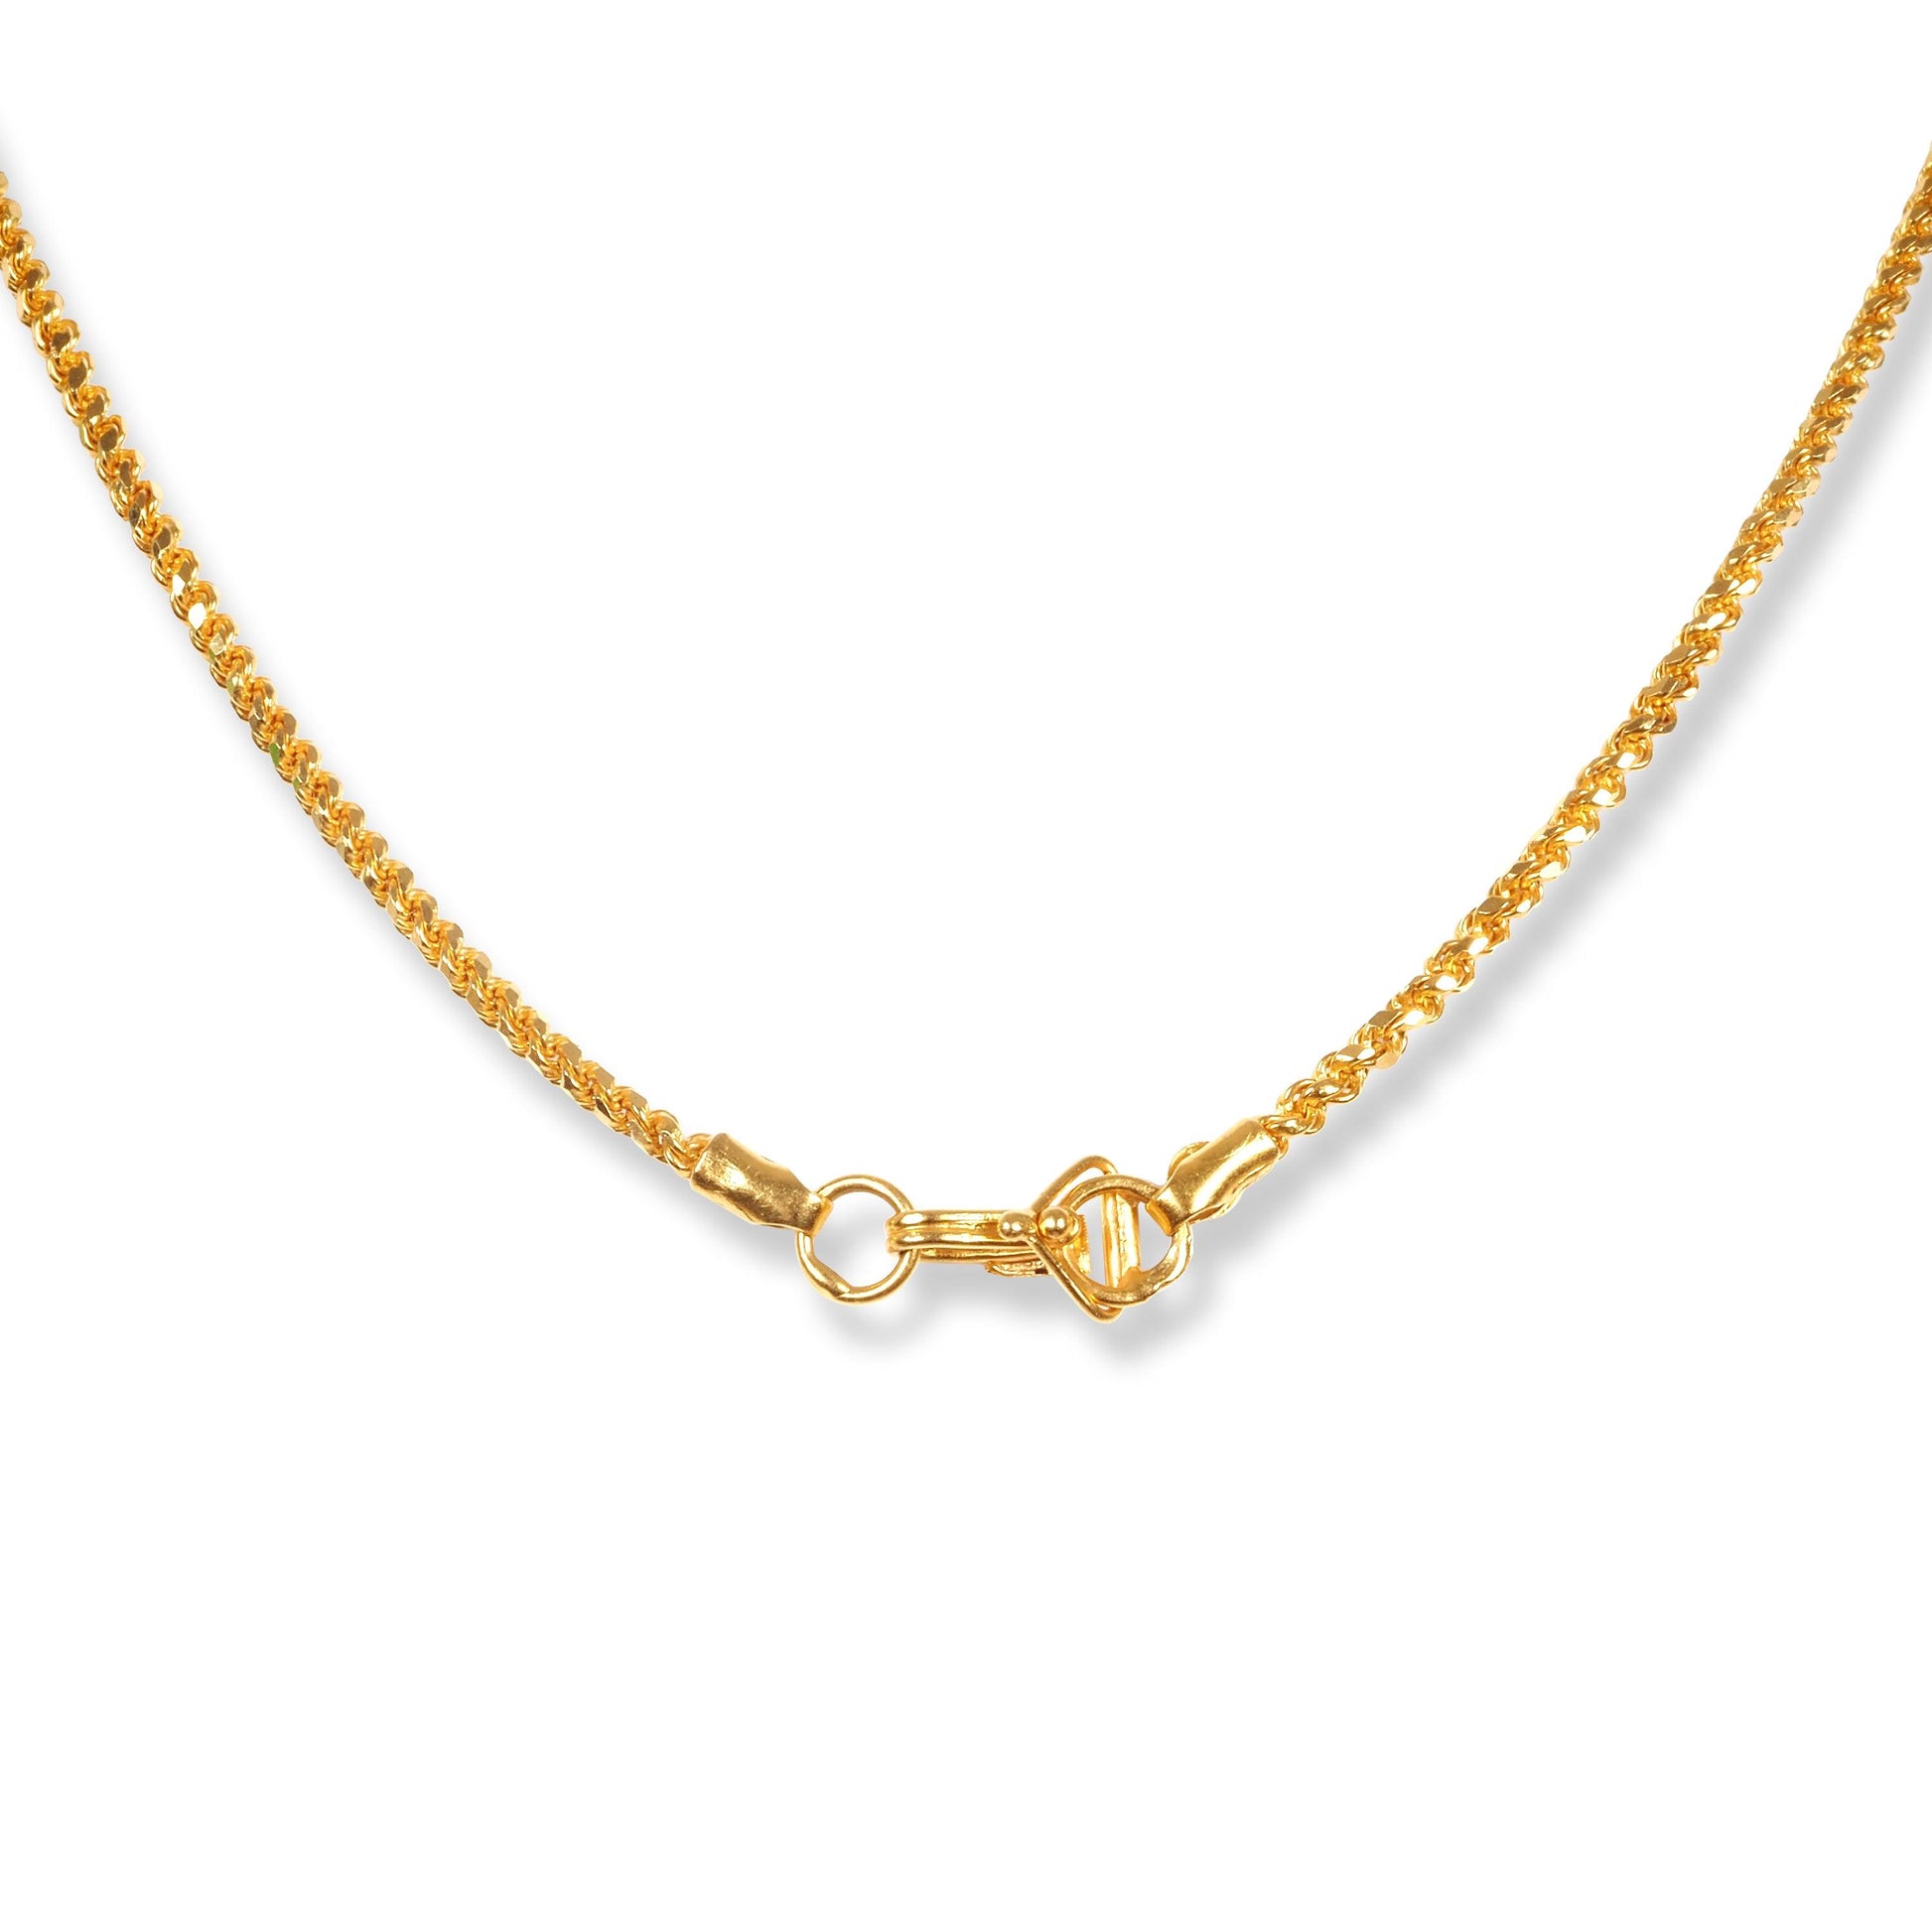 22ct Gold Rope Chain with Hook Clasp C-7142 - Minar Jewellers